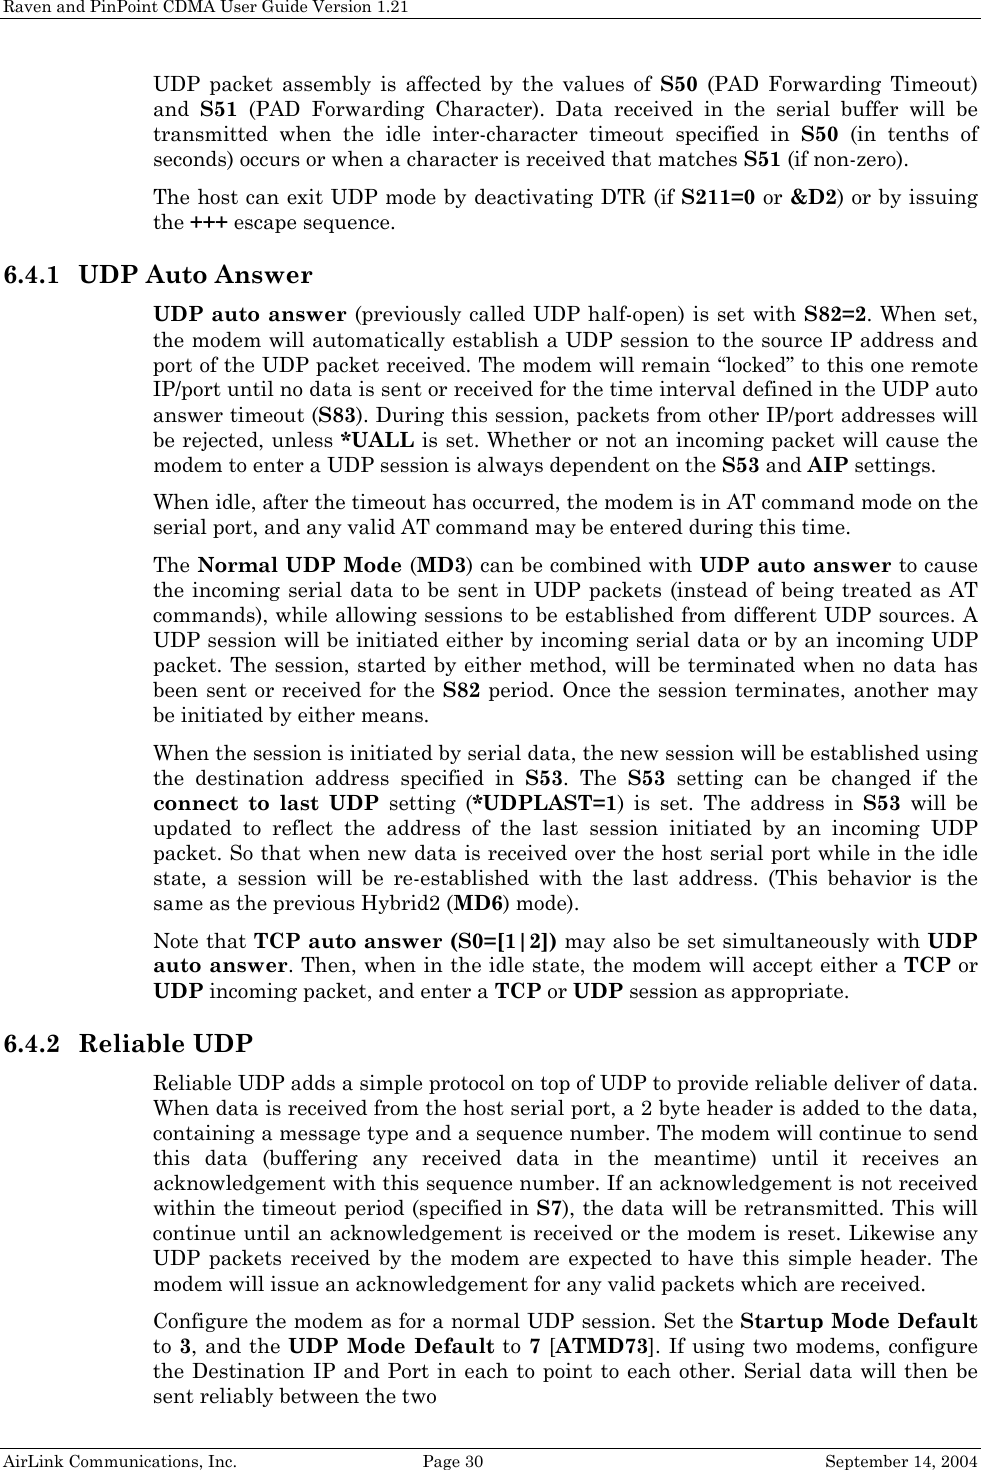 Raven and PinPoint CDMA User Guide Version 1.21 AirLink Communications, Inc.  Page 30  September 14, 2004 UDP packet assembly is affected by the values of S50 (PAD Forwarding Timeout) and  S51 (PAD Forwarding Character). Data received in the serial buffer will be transmitted when the idle inter-character timeout specified in S50 (in tenths of seconds) occurs or when a character is received that matches S51 (if non-zero). The host can exit UDP mode by deactivating DTR (if S211=0 or &amp;D2) or by issuing the +++ escape sequence. 6.4.1 UDP Auto Answer UDP auto answer (previously called UDP half-open) is set with S82=2. When set, the modem will automatically establish a UDP session to the source IP address and port of the UDP packet received. The modem will remain “locked” to this one remote IP/port until no data is sent or received for the time interval defined in the UDP auto answer timeout (S83). During this session, packets from other IP/port addresses will be rejected, unless *UALL is set. Whether or not an incoming packet will cause the modem to enter a UDP session is always dependent on the S53 and AIP settings. When idle, after the timeout has occurred, the modem is in AT command mode on the serial port, and any valid AT command may be entered during this time. The Normal UDP Mode (MD3) can be combined with UDP auto answer to cause the incoming serial data to be sent in UDP packets (instead of being treated as AT commands), while allowing sessions to be established from different UDP sources. A UDP session will be initiated either by incoming serial data or by an incoming UDP packet. The session, started by either method, will be terminated when no data has been sent or received for the S82 period. Once the session terminates, another may be initiated by either means. When the session is initiated by serial data, the new session will be established using the destination address specified in S53. The S53 setting can be changed if the connect to last UDP setting (*UDPLAST=1) is set. The address in S53 will be updated to reflect the address of the last session initiated by an incoming UDP packet. So that when new data is received over the host serial port while in the idle state, a session will be re-established with the last address. (This behavior is the same as the previous Hybrid2 (MD6) mode). Note that TCP auto answer (S0=[1|2]) may also be set simultaneously with UDP auto answer. Then, when in the idle state, the modem will accept either a TCP or UDP incoming packet, and enter a TCP or UDP session as appropriate. 6.4.2 Reliable UDP Reliable UDP adds a simple protocol on top of UDP to provide reliable deliver of data. When data is received from the host serial port, a 2 byte header is added to the data, containing a message type and a sequence number. The modem will continue to send this data (buffering any received data in the meantime) until it receives an acknowledgement with this sequence number. If an acknowledgement is not received within the timeout period (specified in S7), the data will be retransmitted. This will continue until an acknowledgement is received or the modem is reset. Likewise any UDP packets received by the modem are expected to have this simple header. The modem will issue an acknowledgement for any valid packets which are received.  Configure the modem as for a normal UDP session. Set the Startup Mode Default to 3, and the UDP Mode Default to 7 [ATMD73]. If using two modems, configure the Destination IP and Port in each to point to each other. Serial data will then be sent reliably between the two 